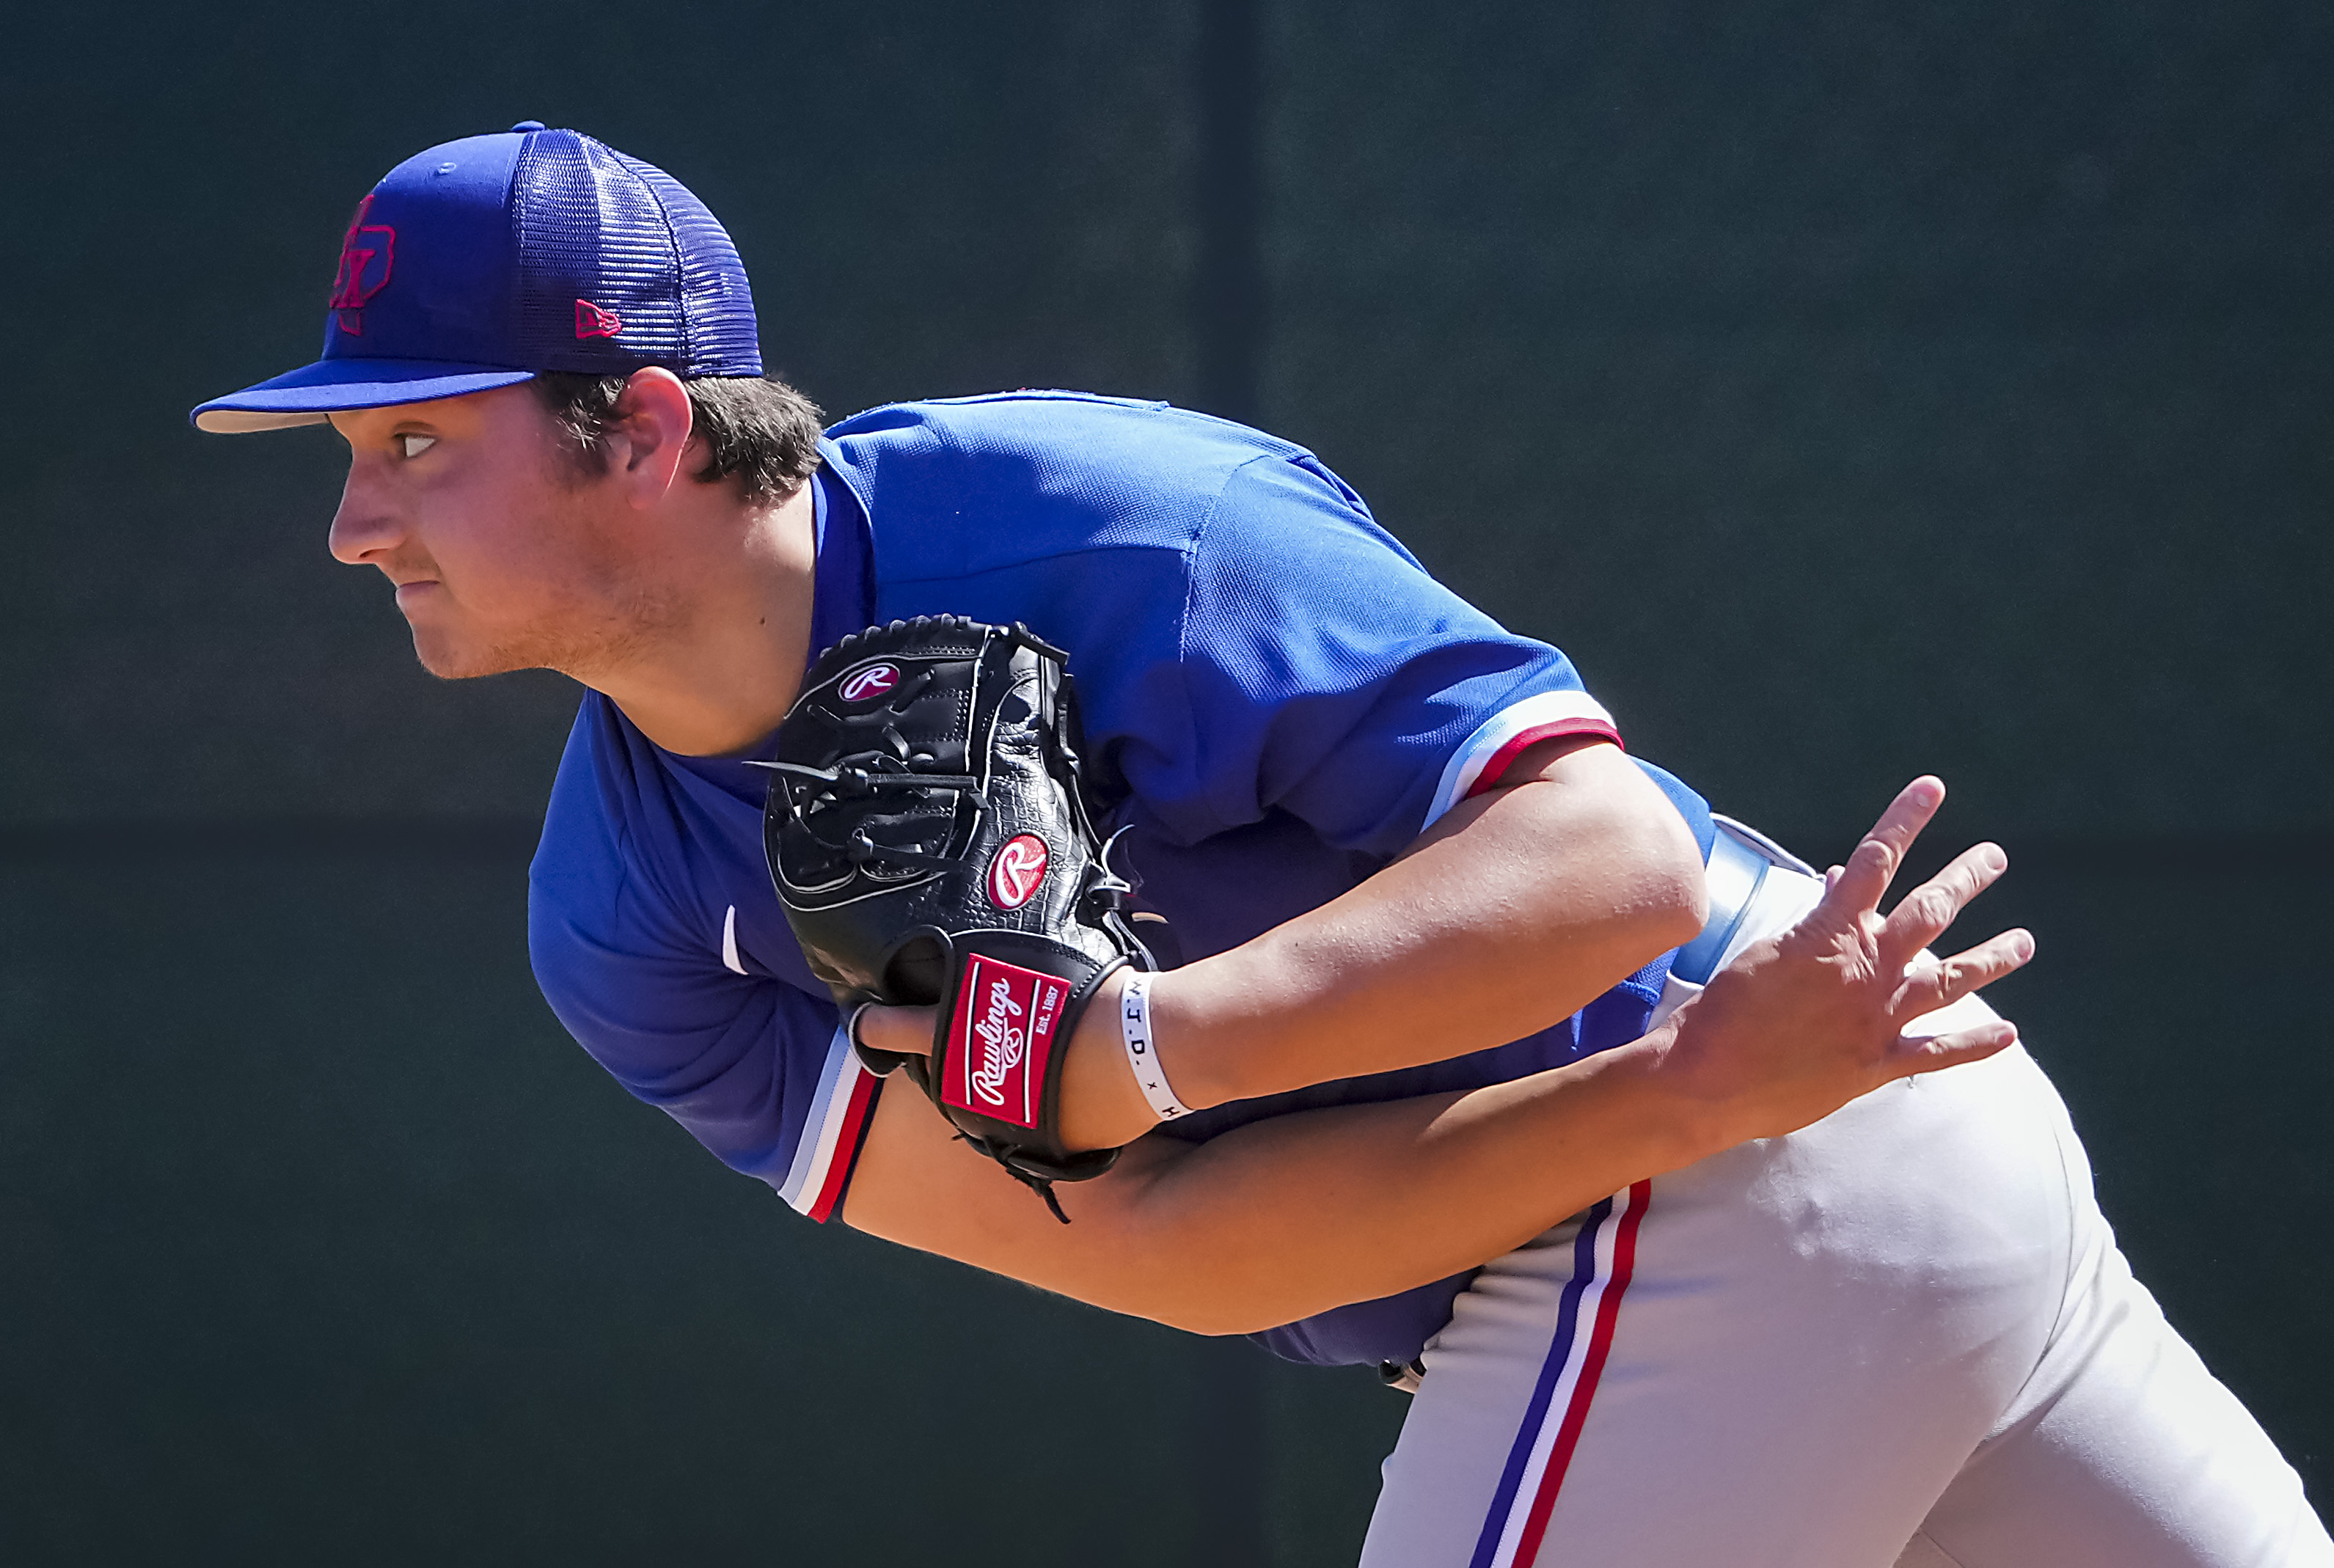 Rangers prospect Owen White describes his whirlwind day and MLB debut